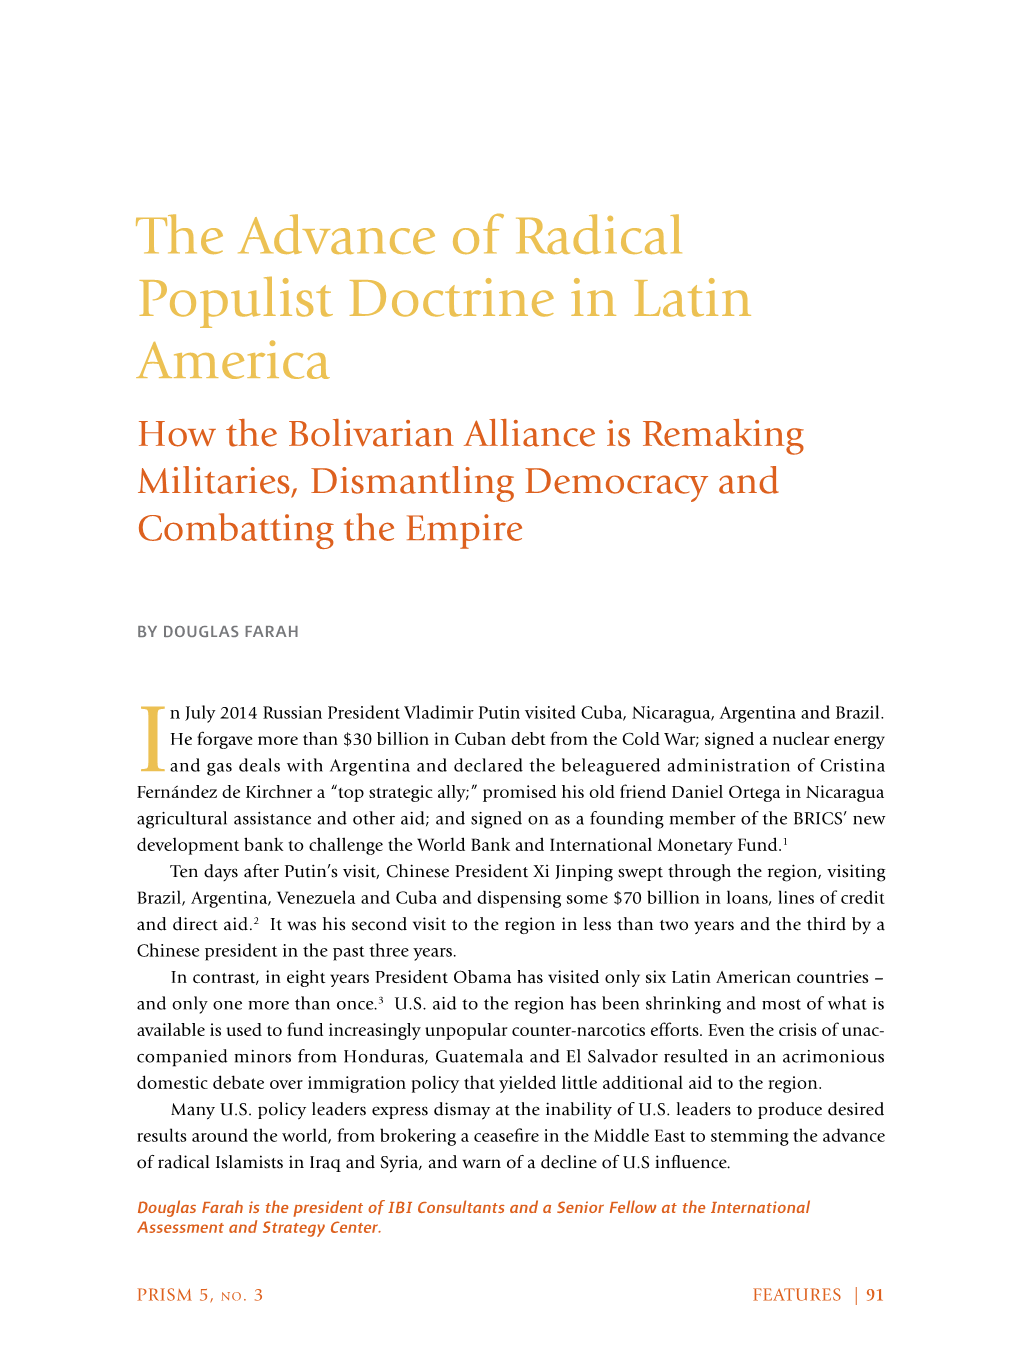 The Advance of Radical Populist Doctrine in Latin America How the Bolivarian Alliance Is Remaking Militaries, Dismantling Democracy and Combatting the Empire